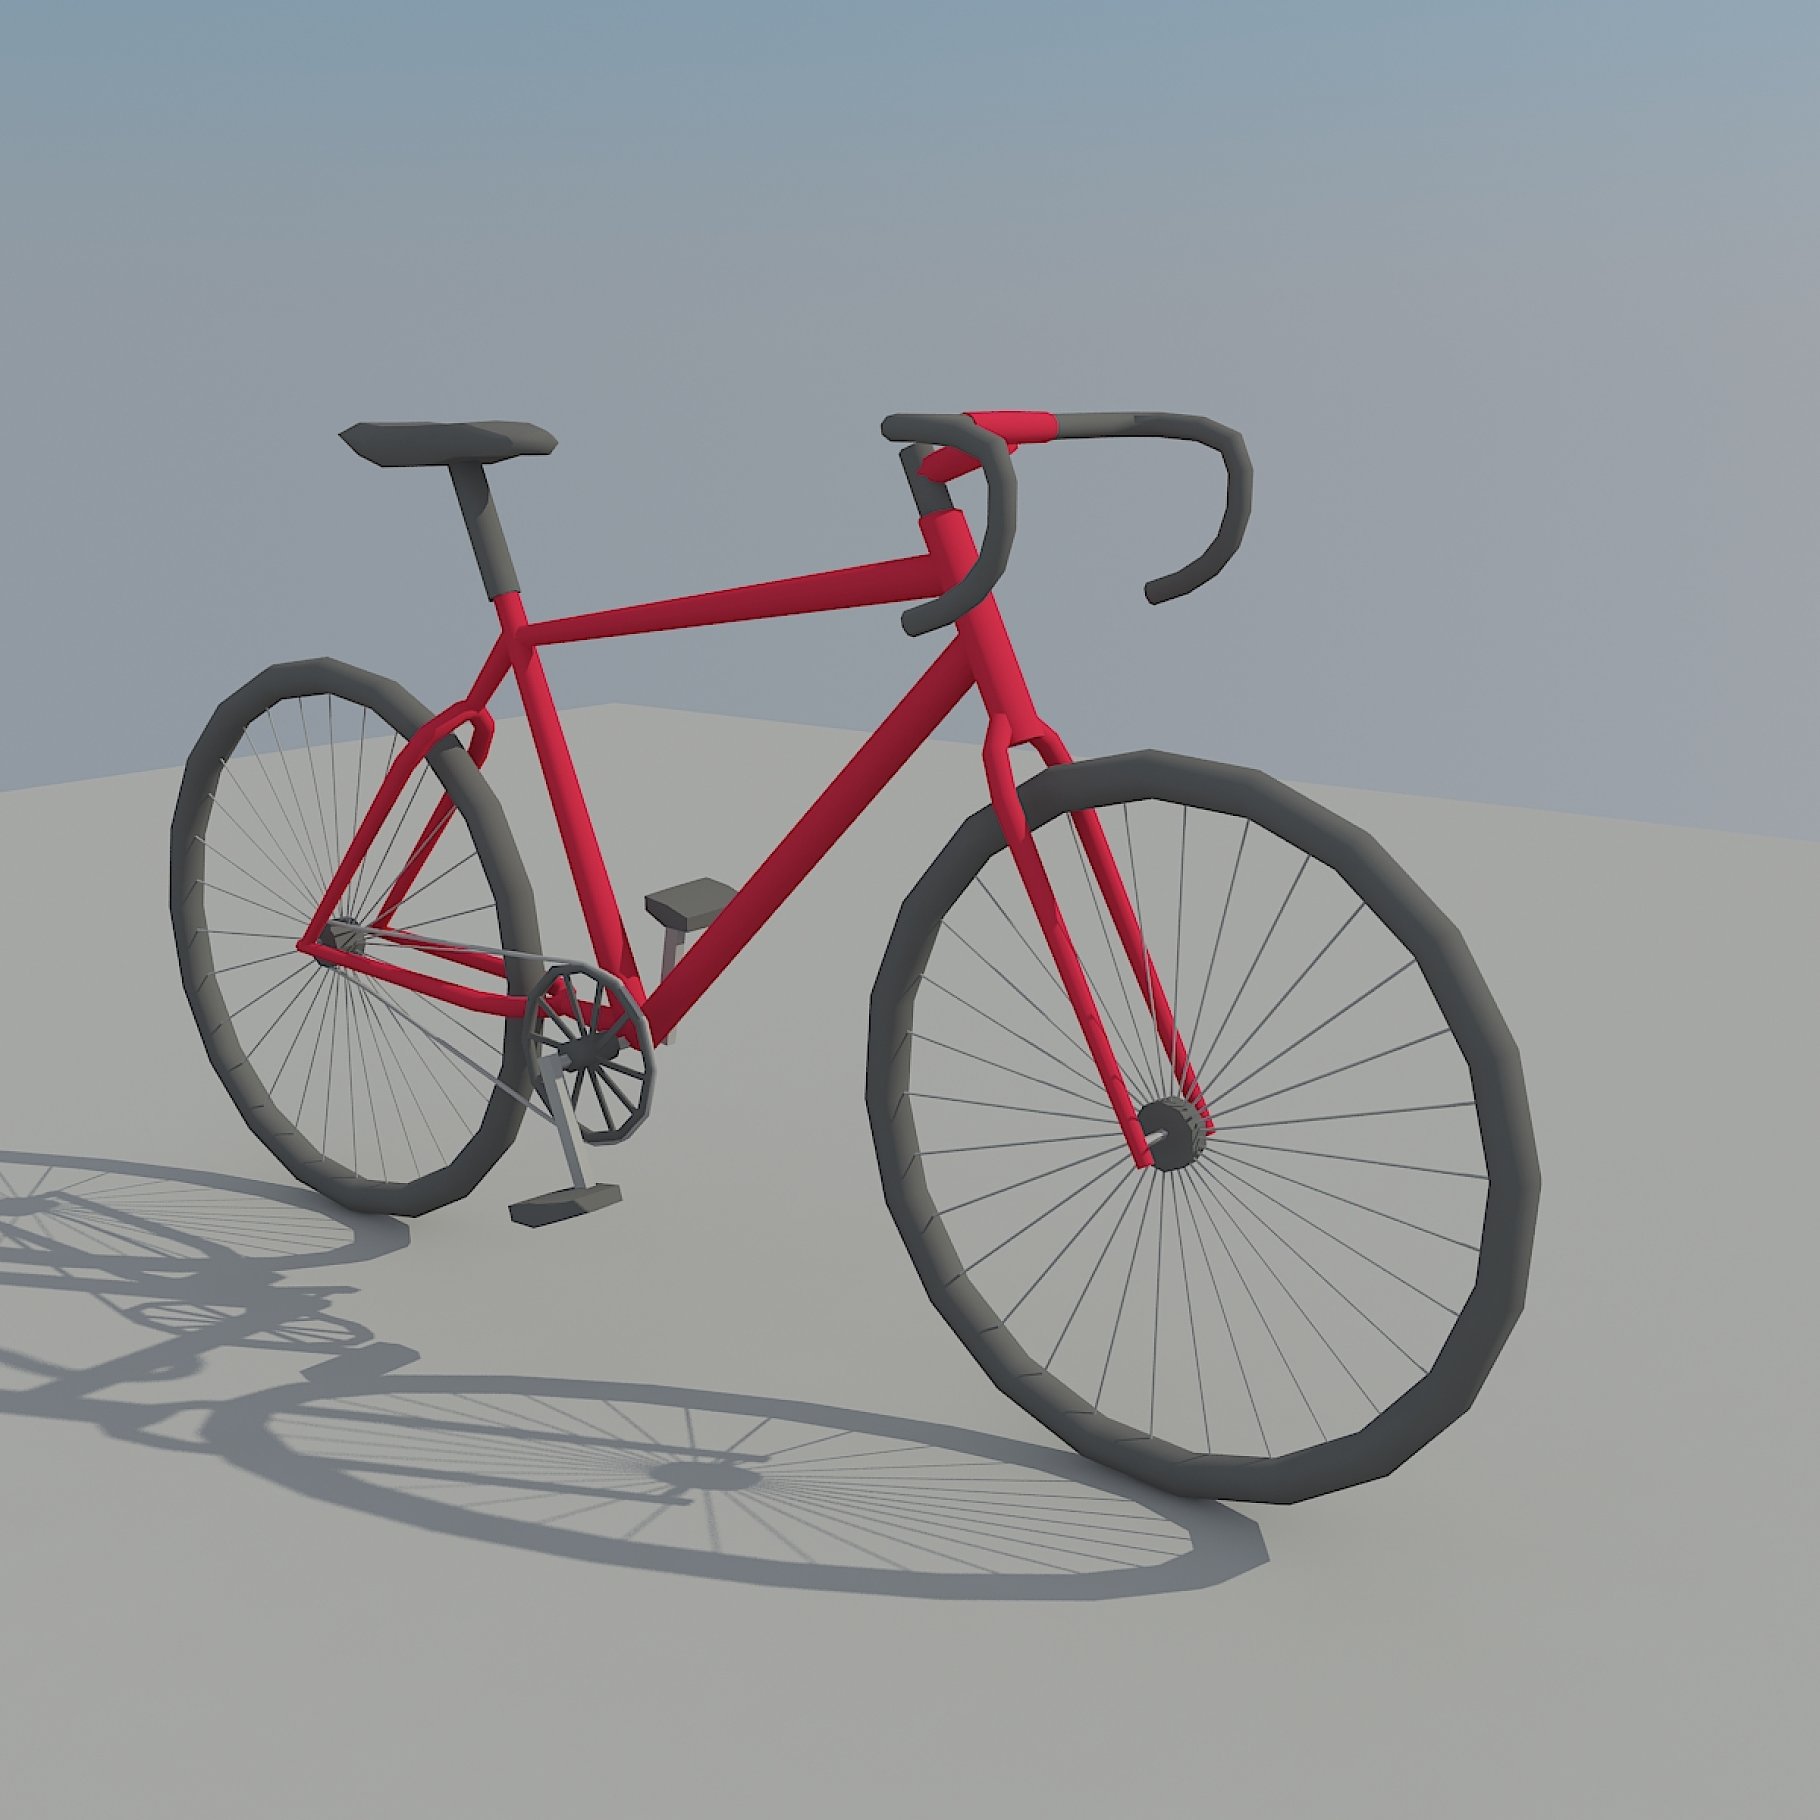 Red bicycle.